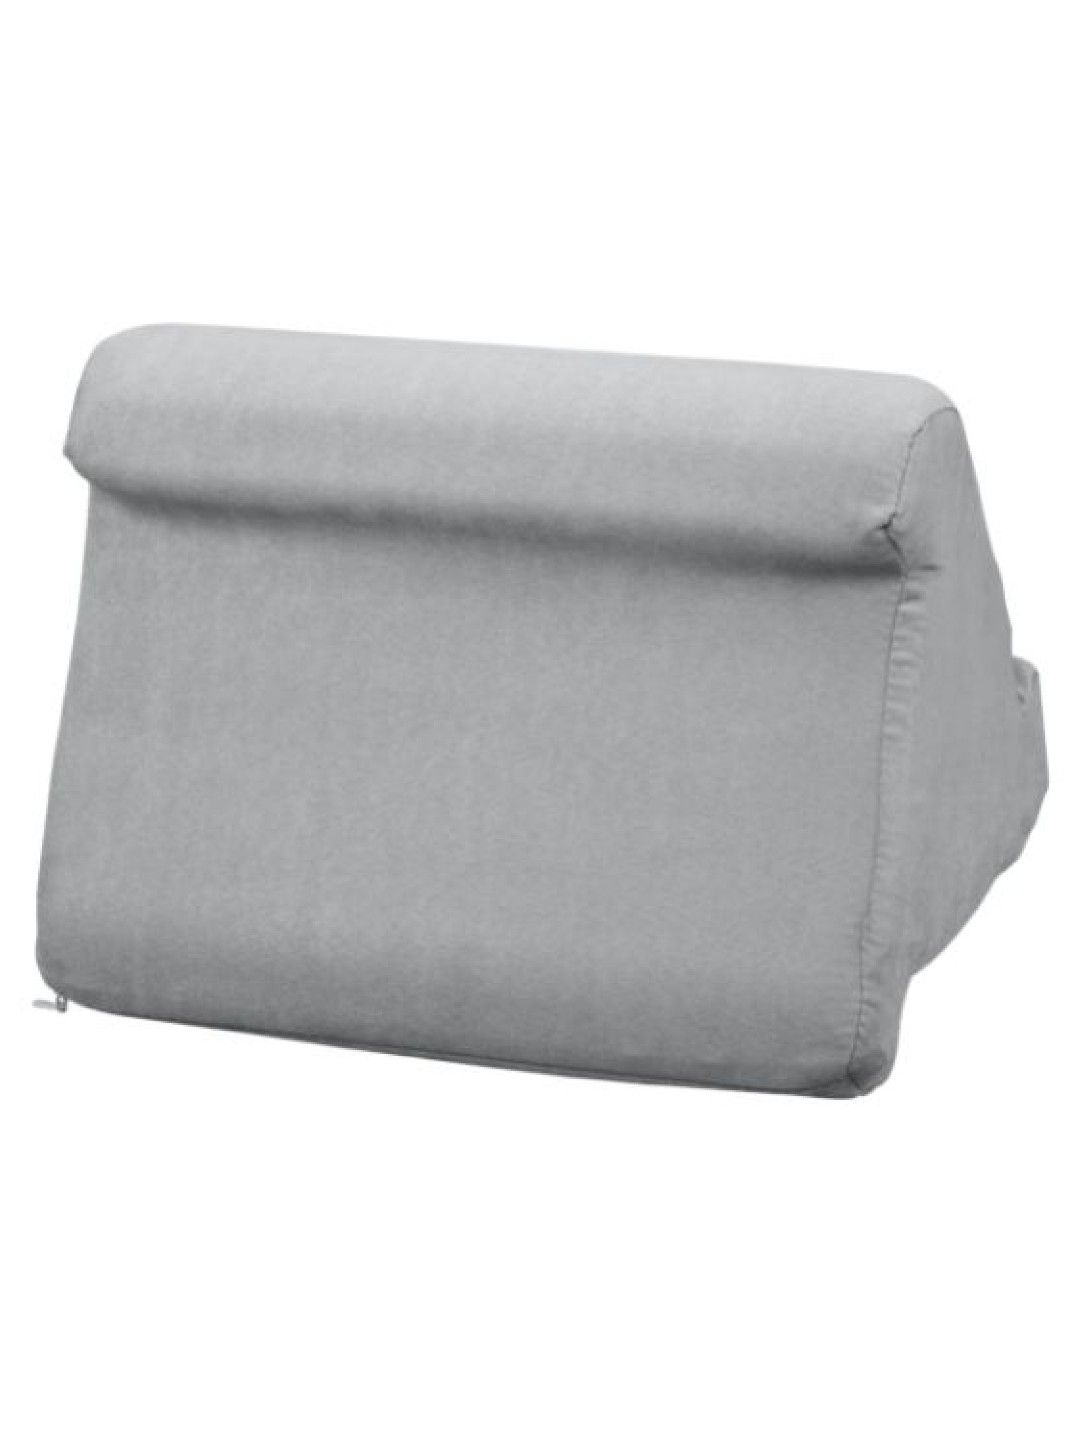 Sunbeams Lifestyle Gray Label Premium Tablet Pillow Stand (No Color- Image 3)